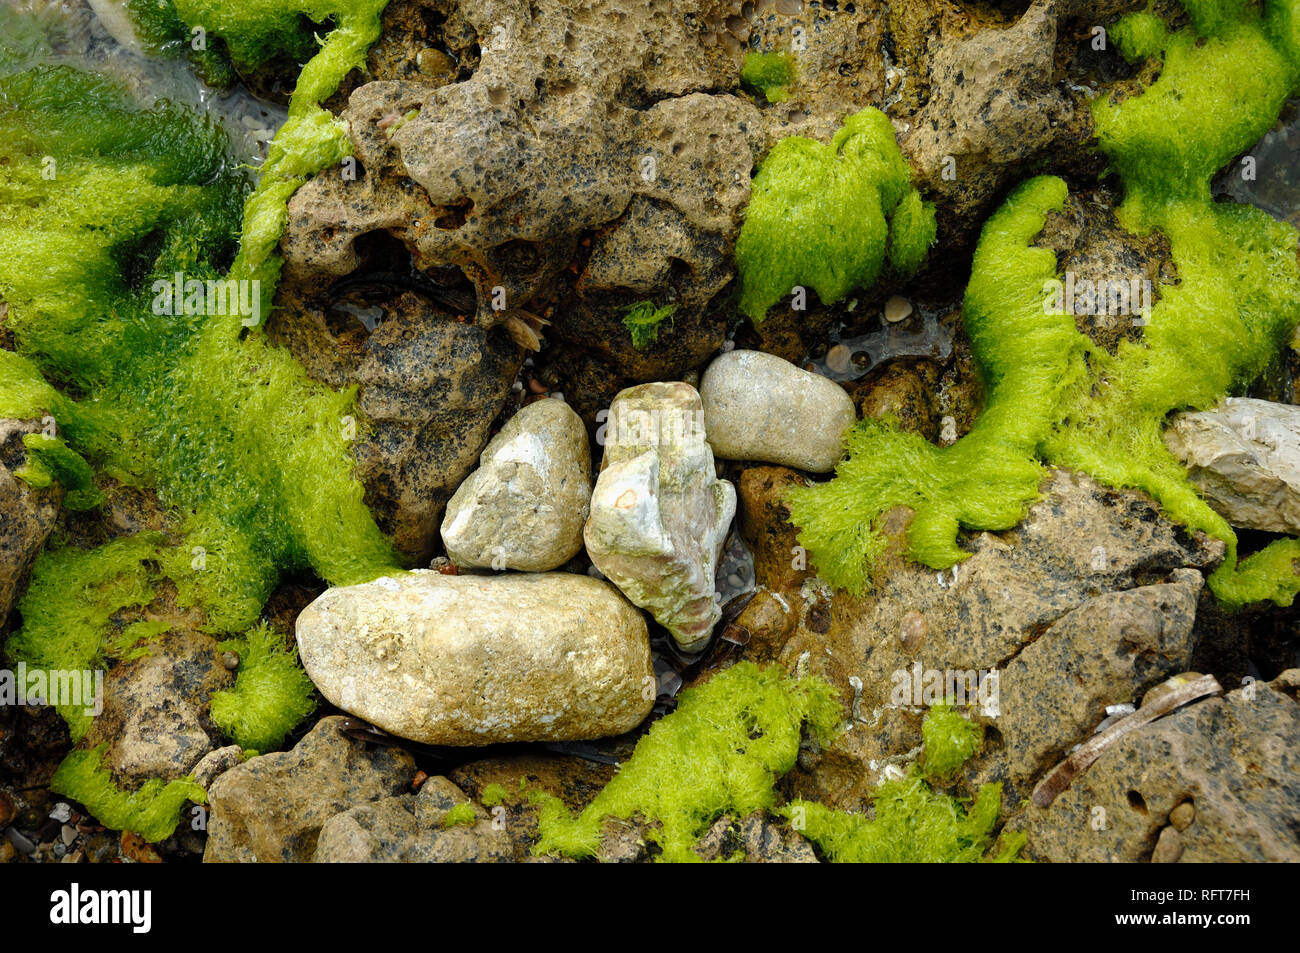 Abstract Natural Patterns of Boulders and Seaweed Covered Rocks ao the Shoreline at Île Saint Honorat, one of the Lérins Islands, French Riviera Stock Photo